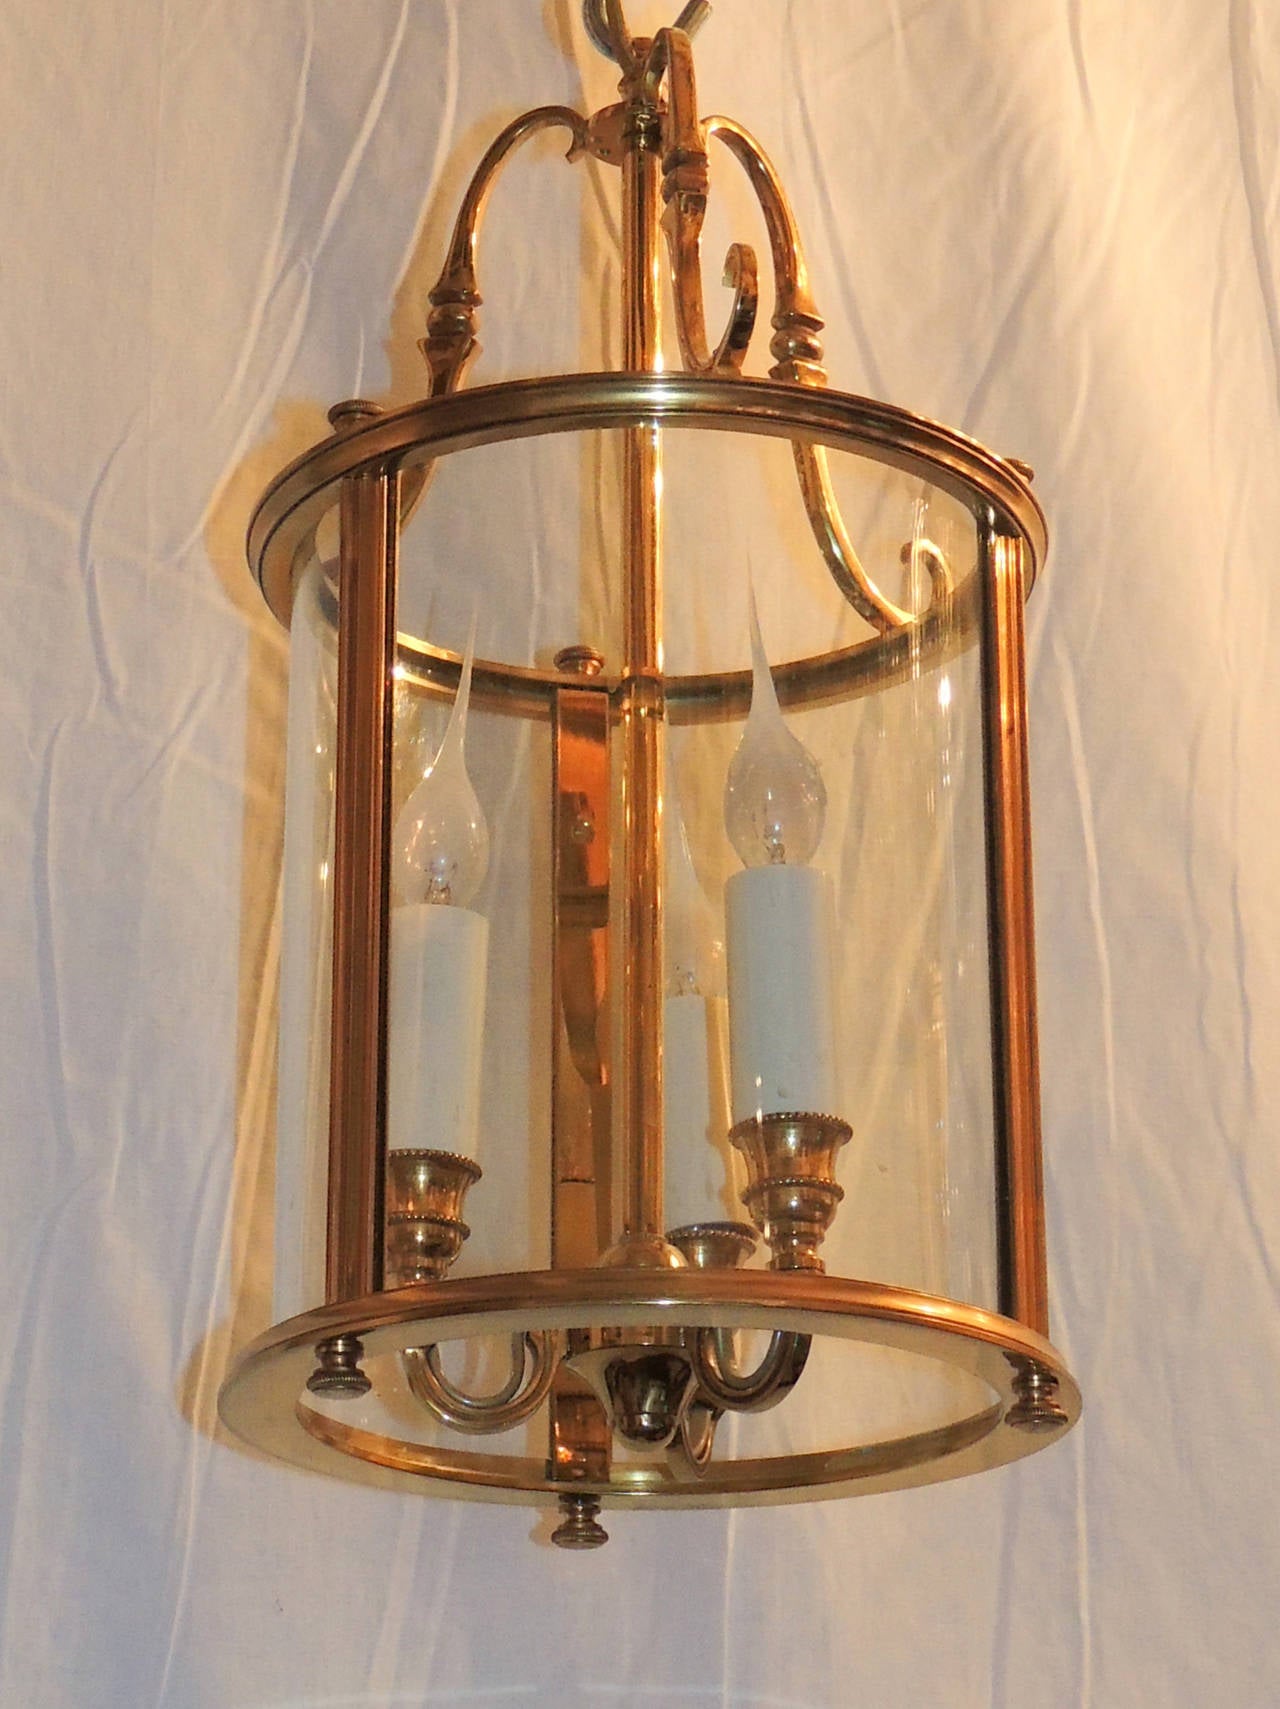 Outstanding Pair Of Gilt Bronze Louis XVI Lanterns Fixtures With Curved Glass Panels, In The Duncan Phyfe Style. Each Set With Three Lights Inside

Available as a pair or individually

18